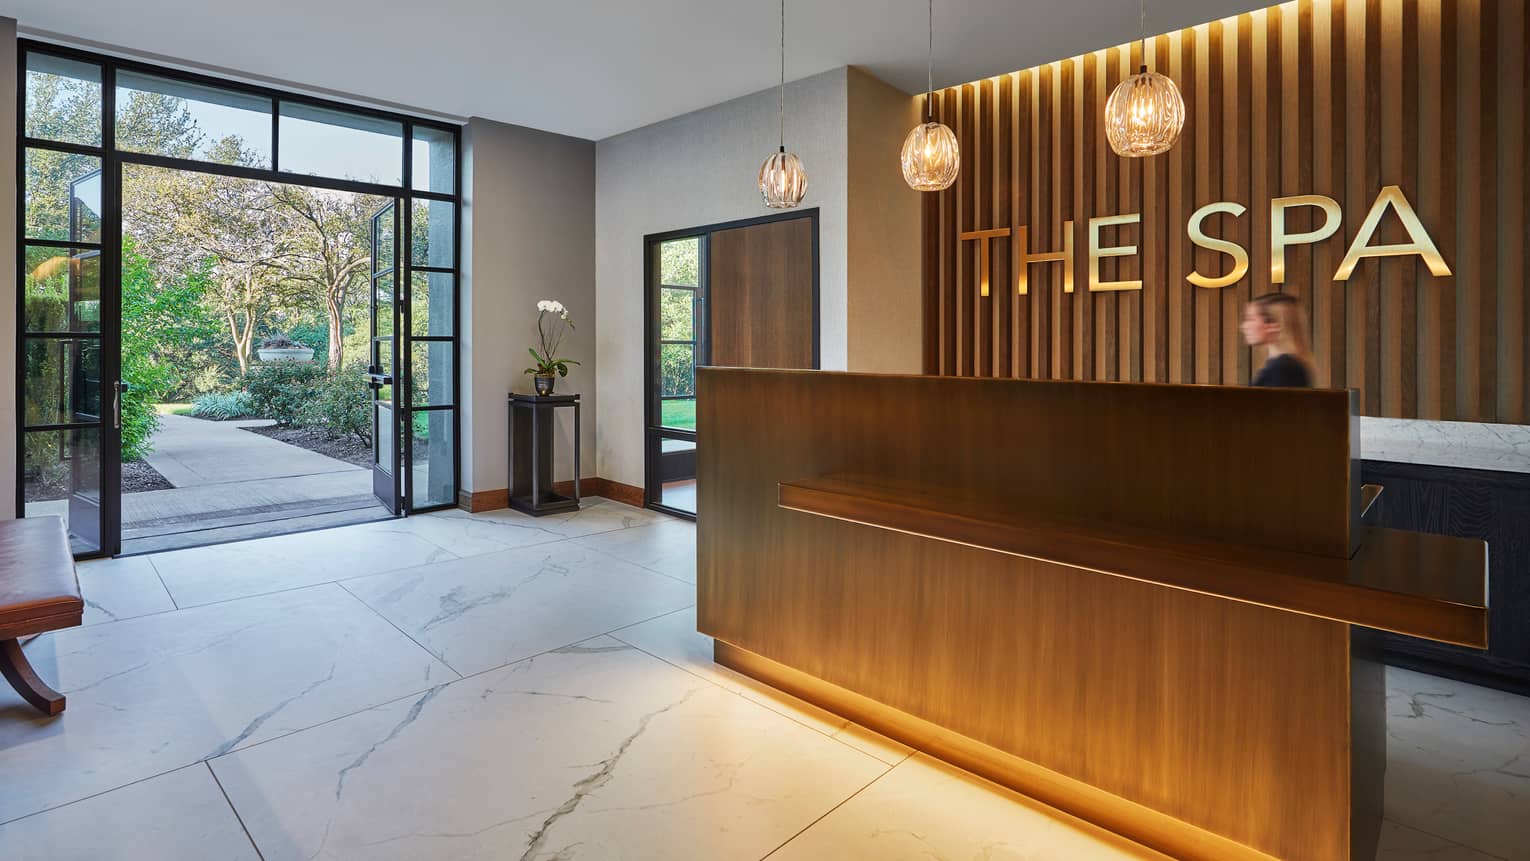 The Spa modern wood reception desk with gold sign, white marble floors, glass door